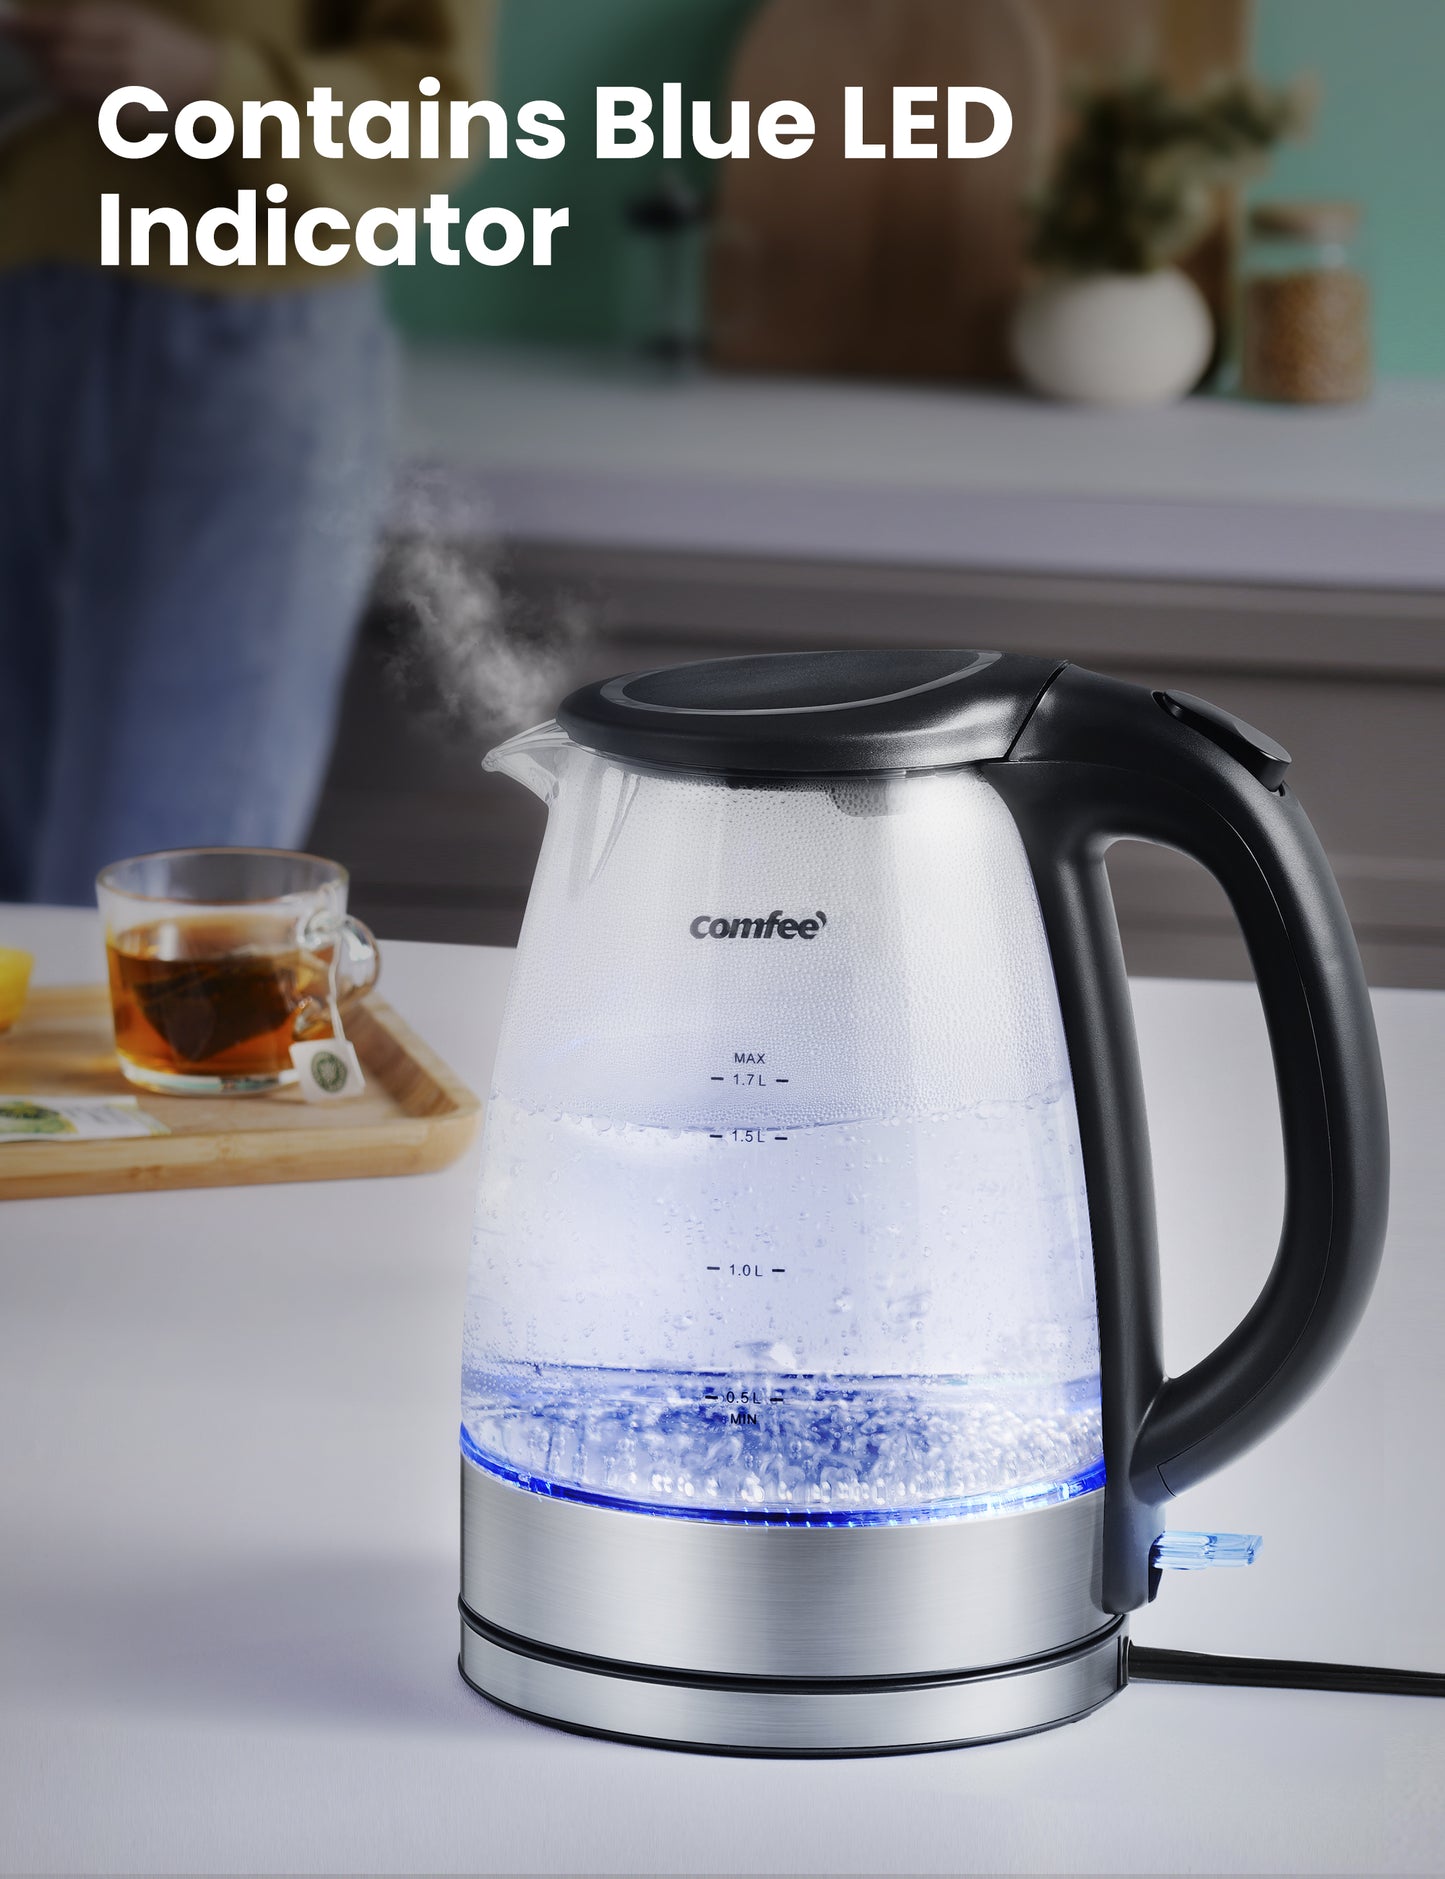 comfee electric glass kettle contains LED indicator